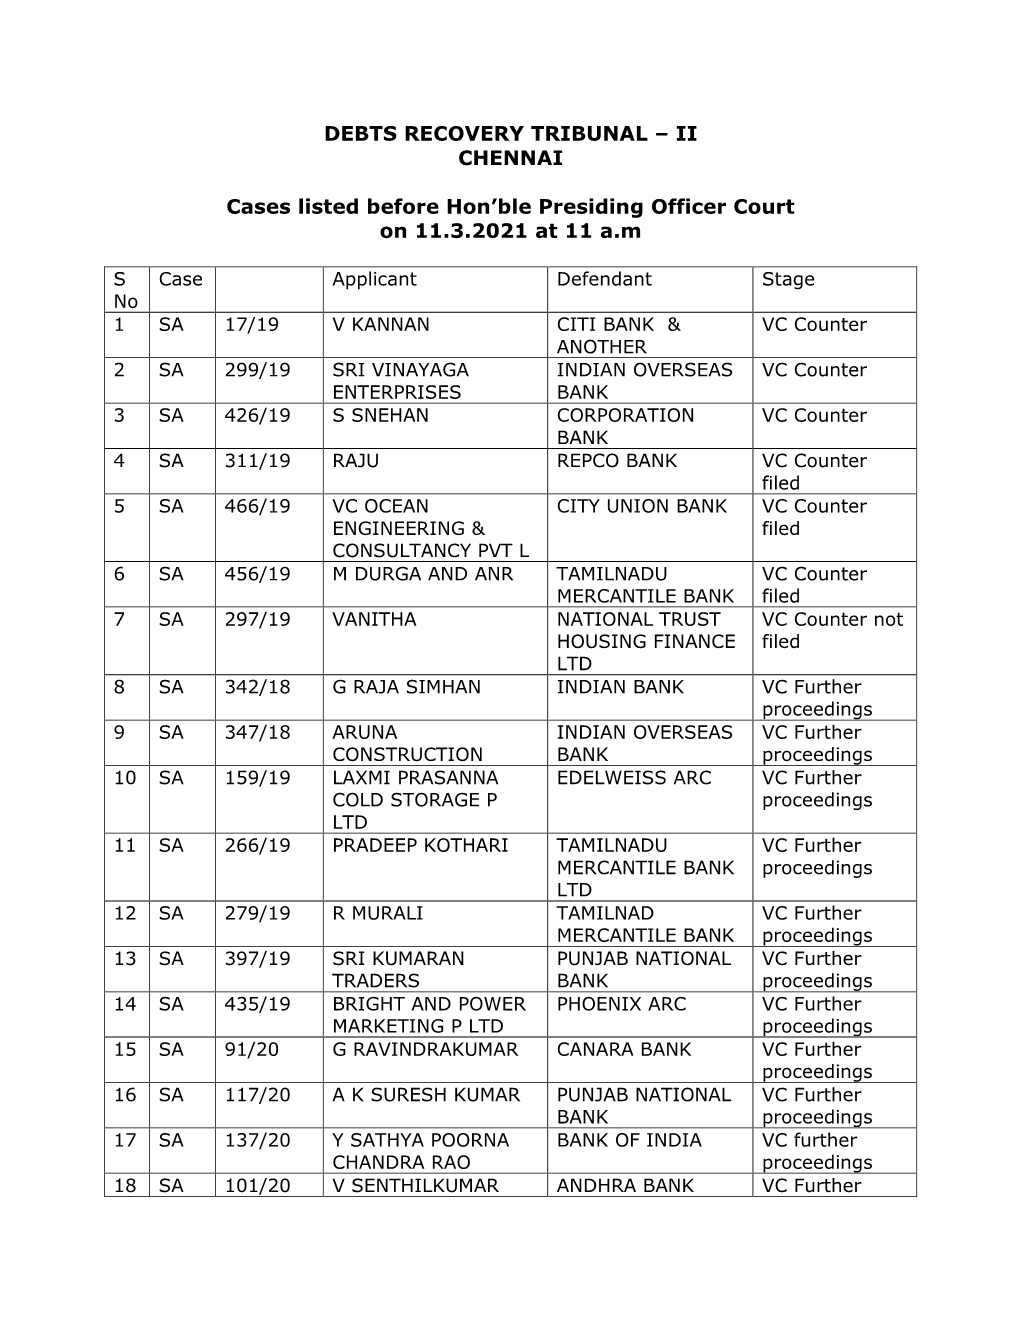 DEBTS RECOVERY TRIBUNAL – II CHENNAI Cases Listed Before Hon'ble Presiding Officer Court on 11.3.2021 at 11